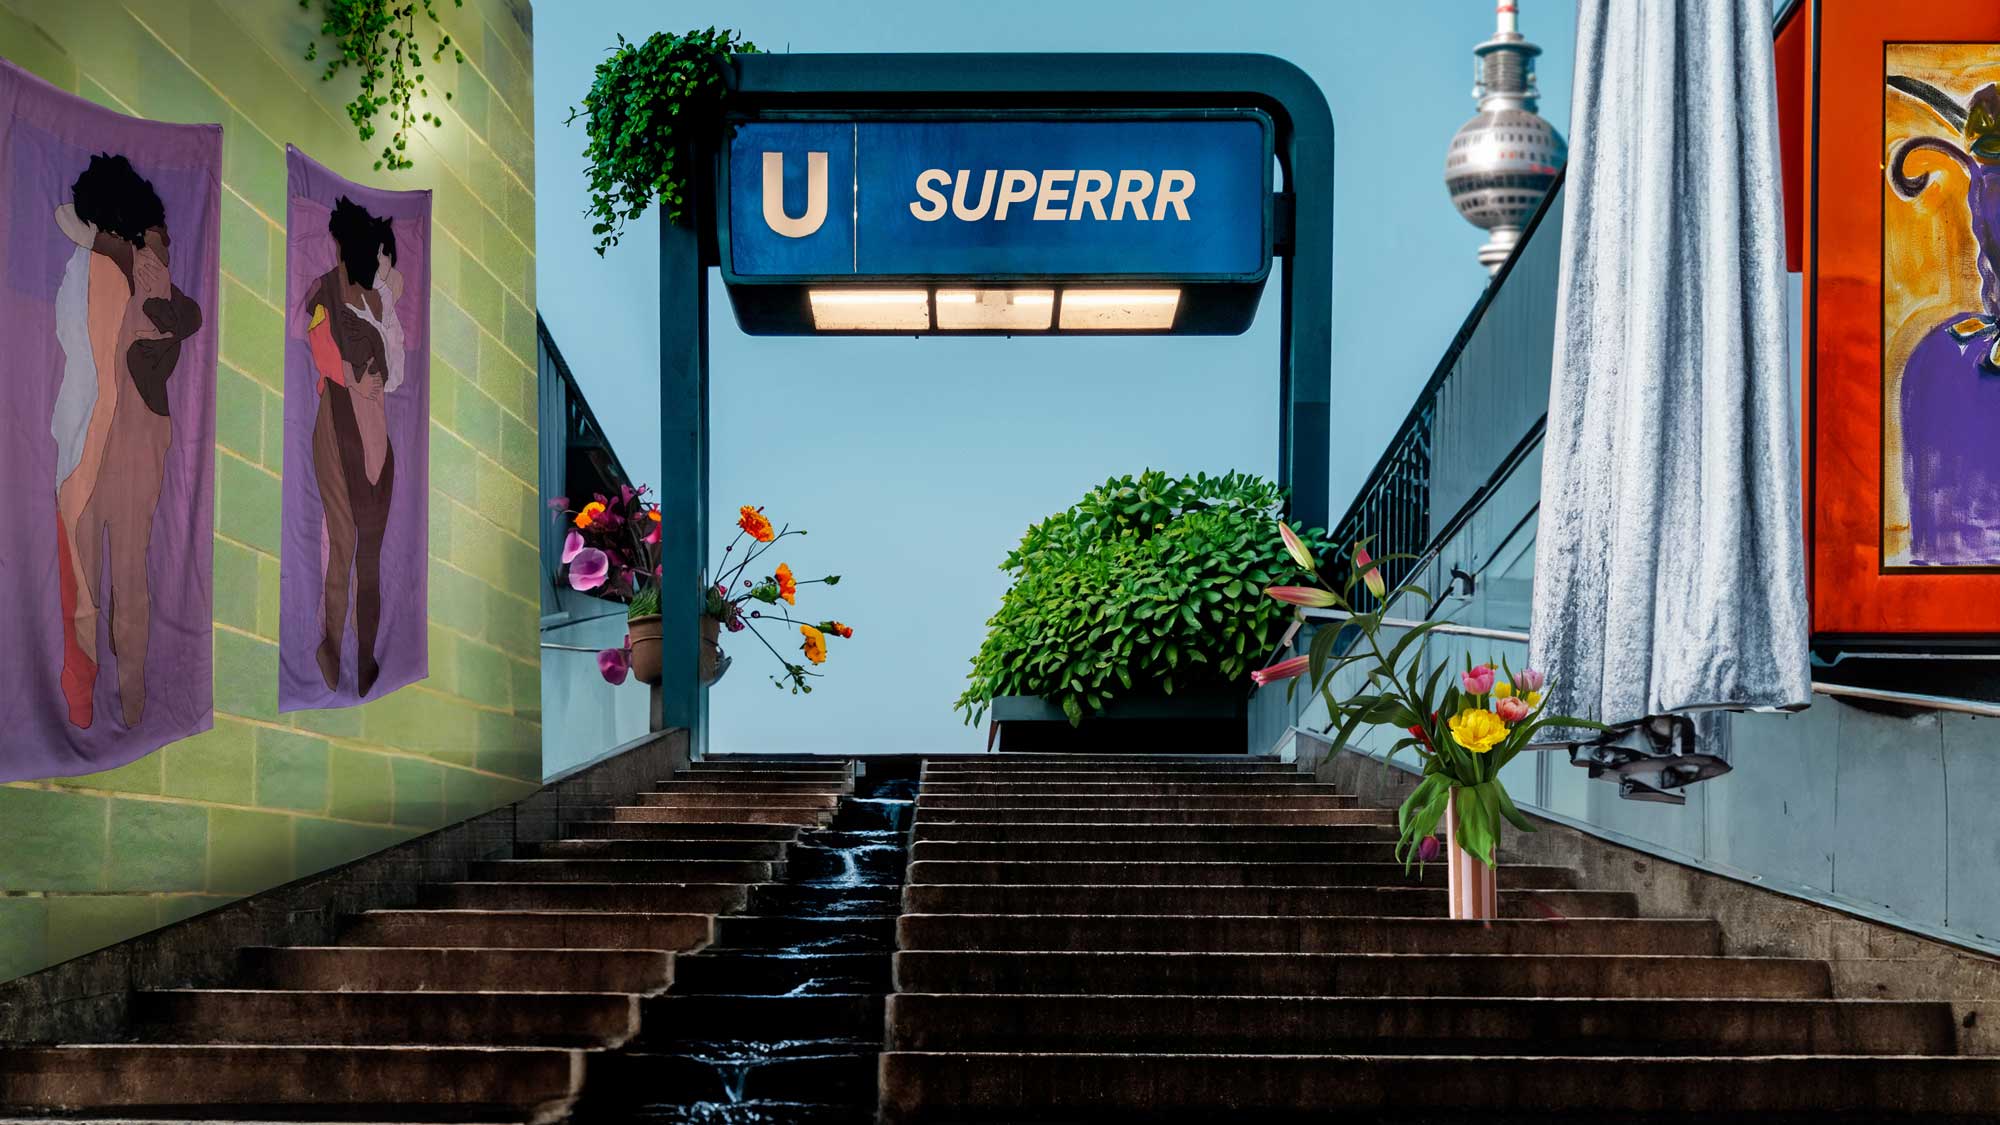 A ubahn entrance with colorful objects